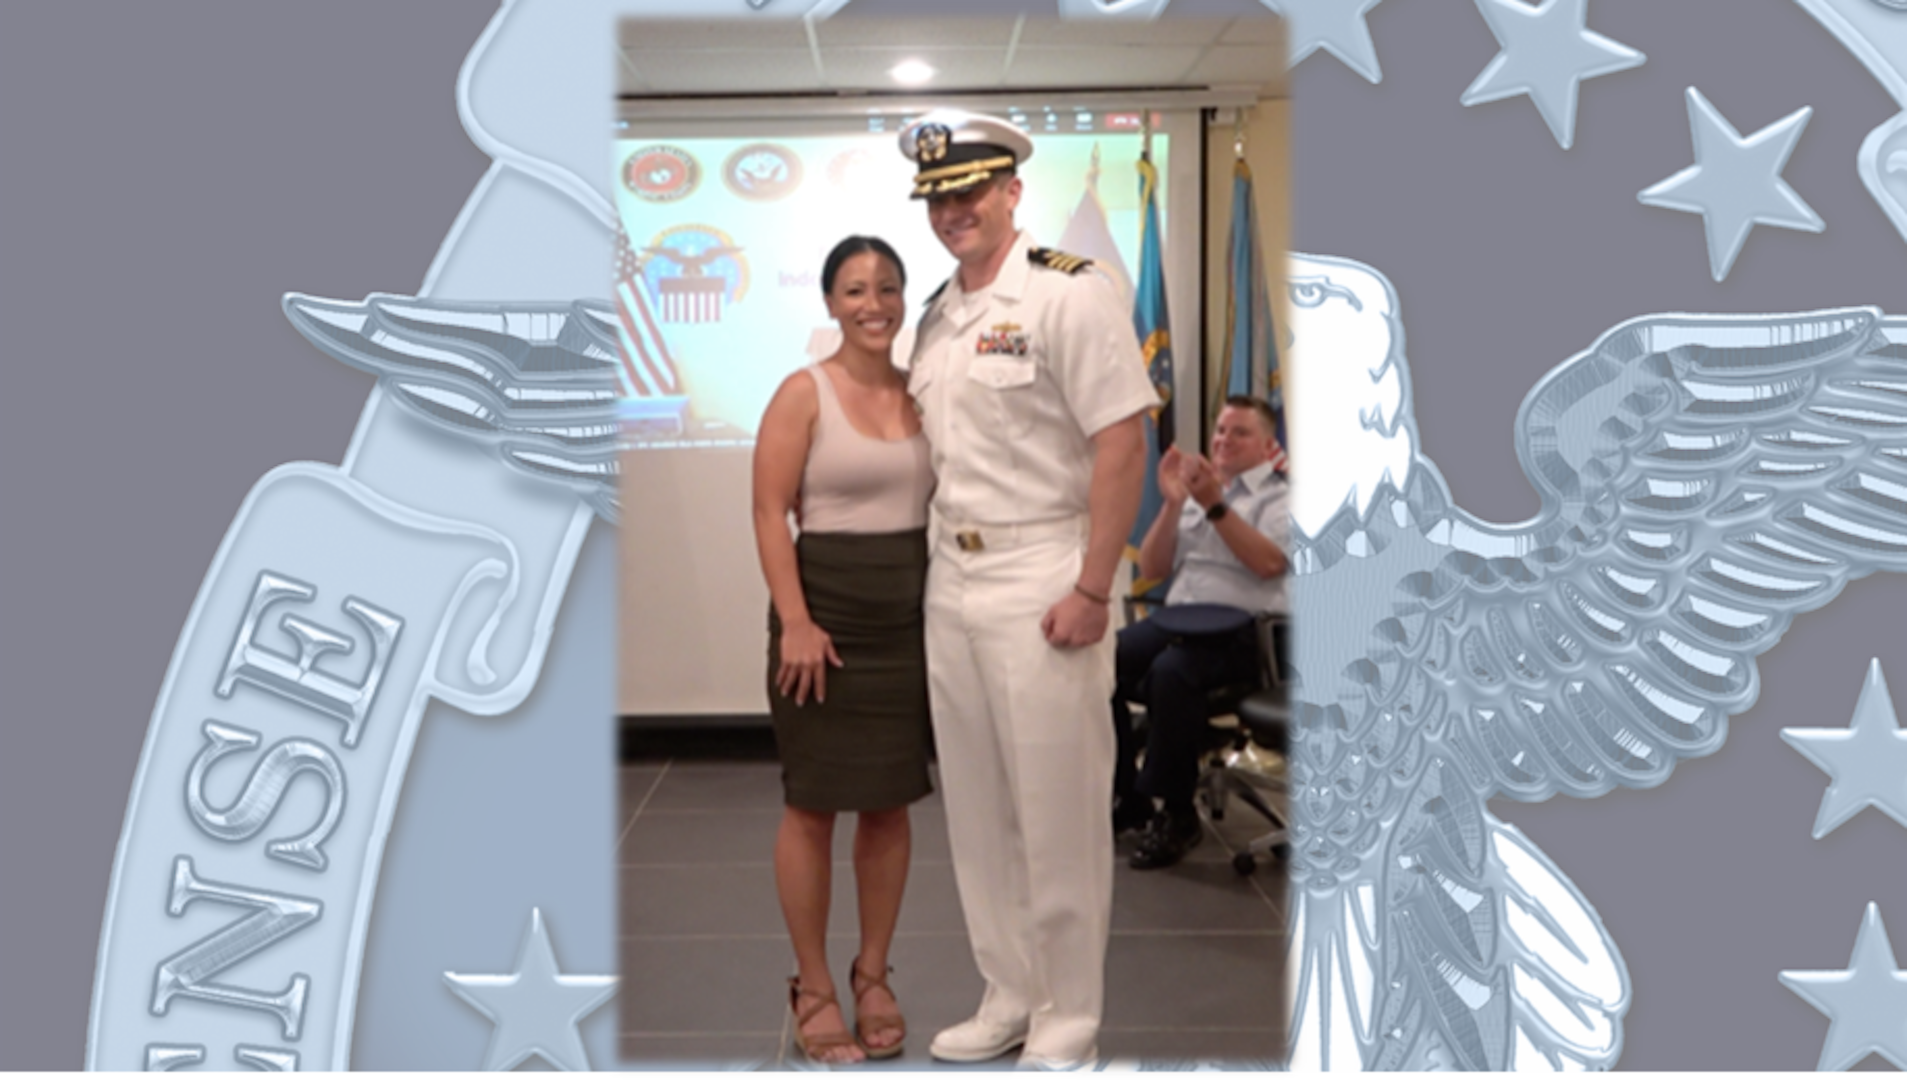 a Navy officer in unform with his wife